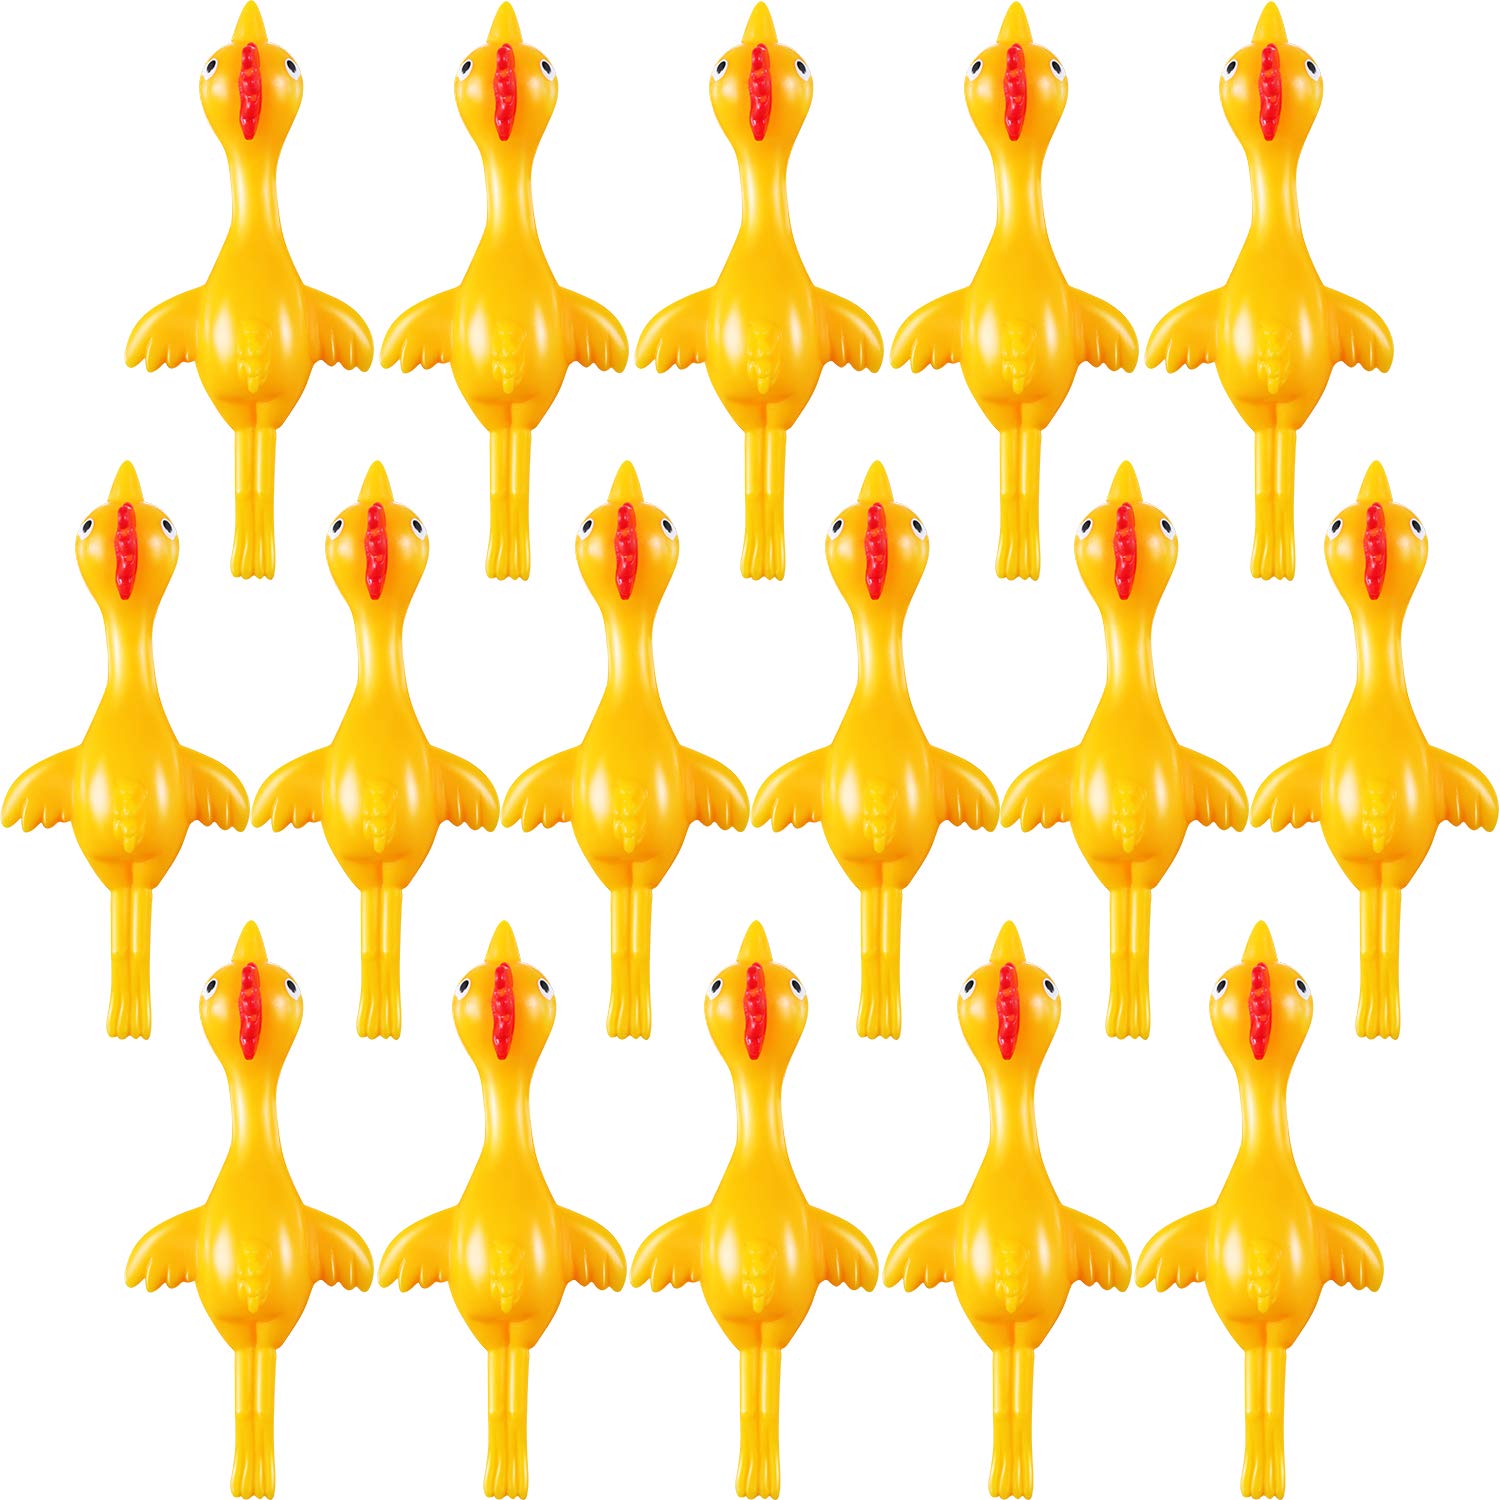 Sumind 16 Pack Slingshot Chicken Rubber Chicken Flick Chicken Flying Chicken Flingers Stretchy Funny Christmas, Easter Chicks Party Activity for Children (Yellow)